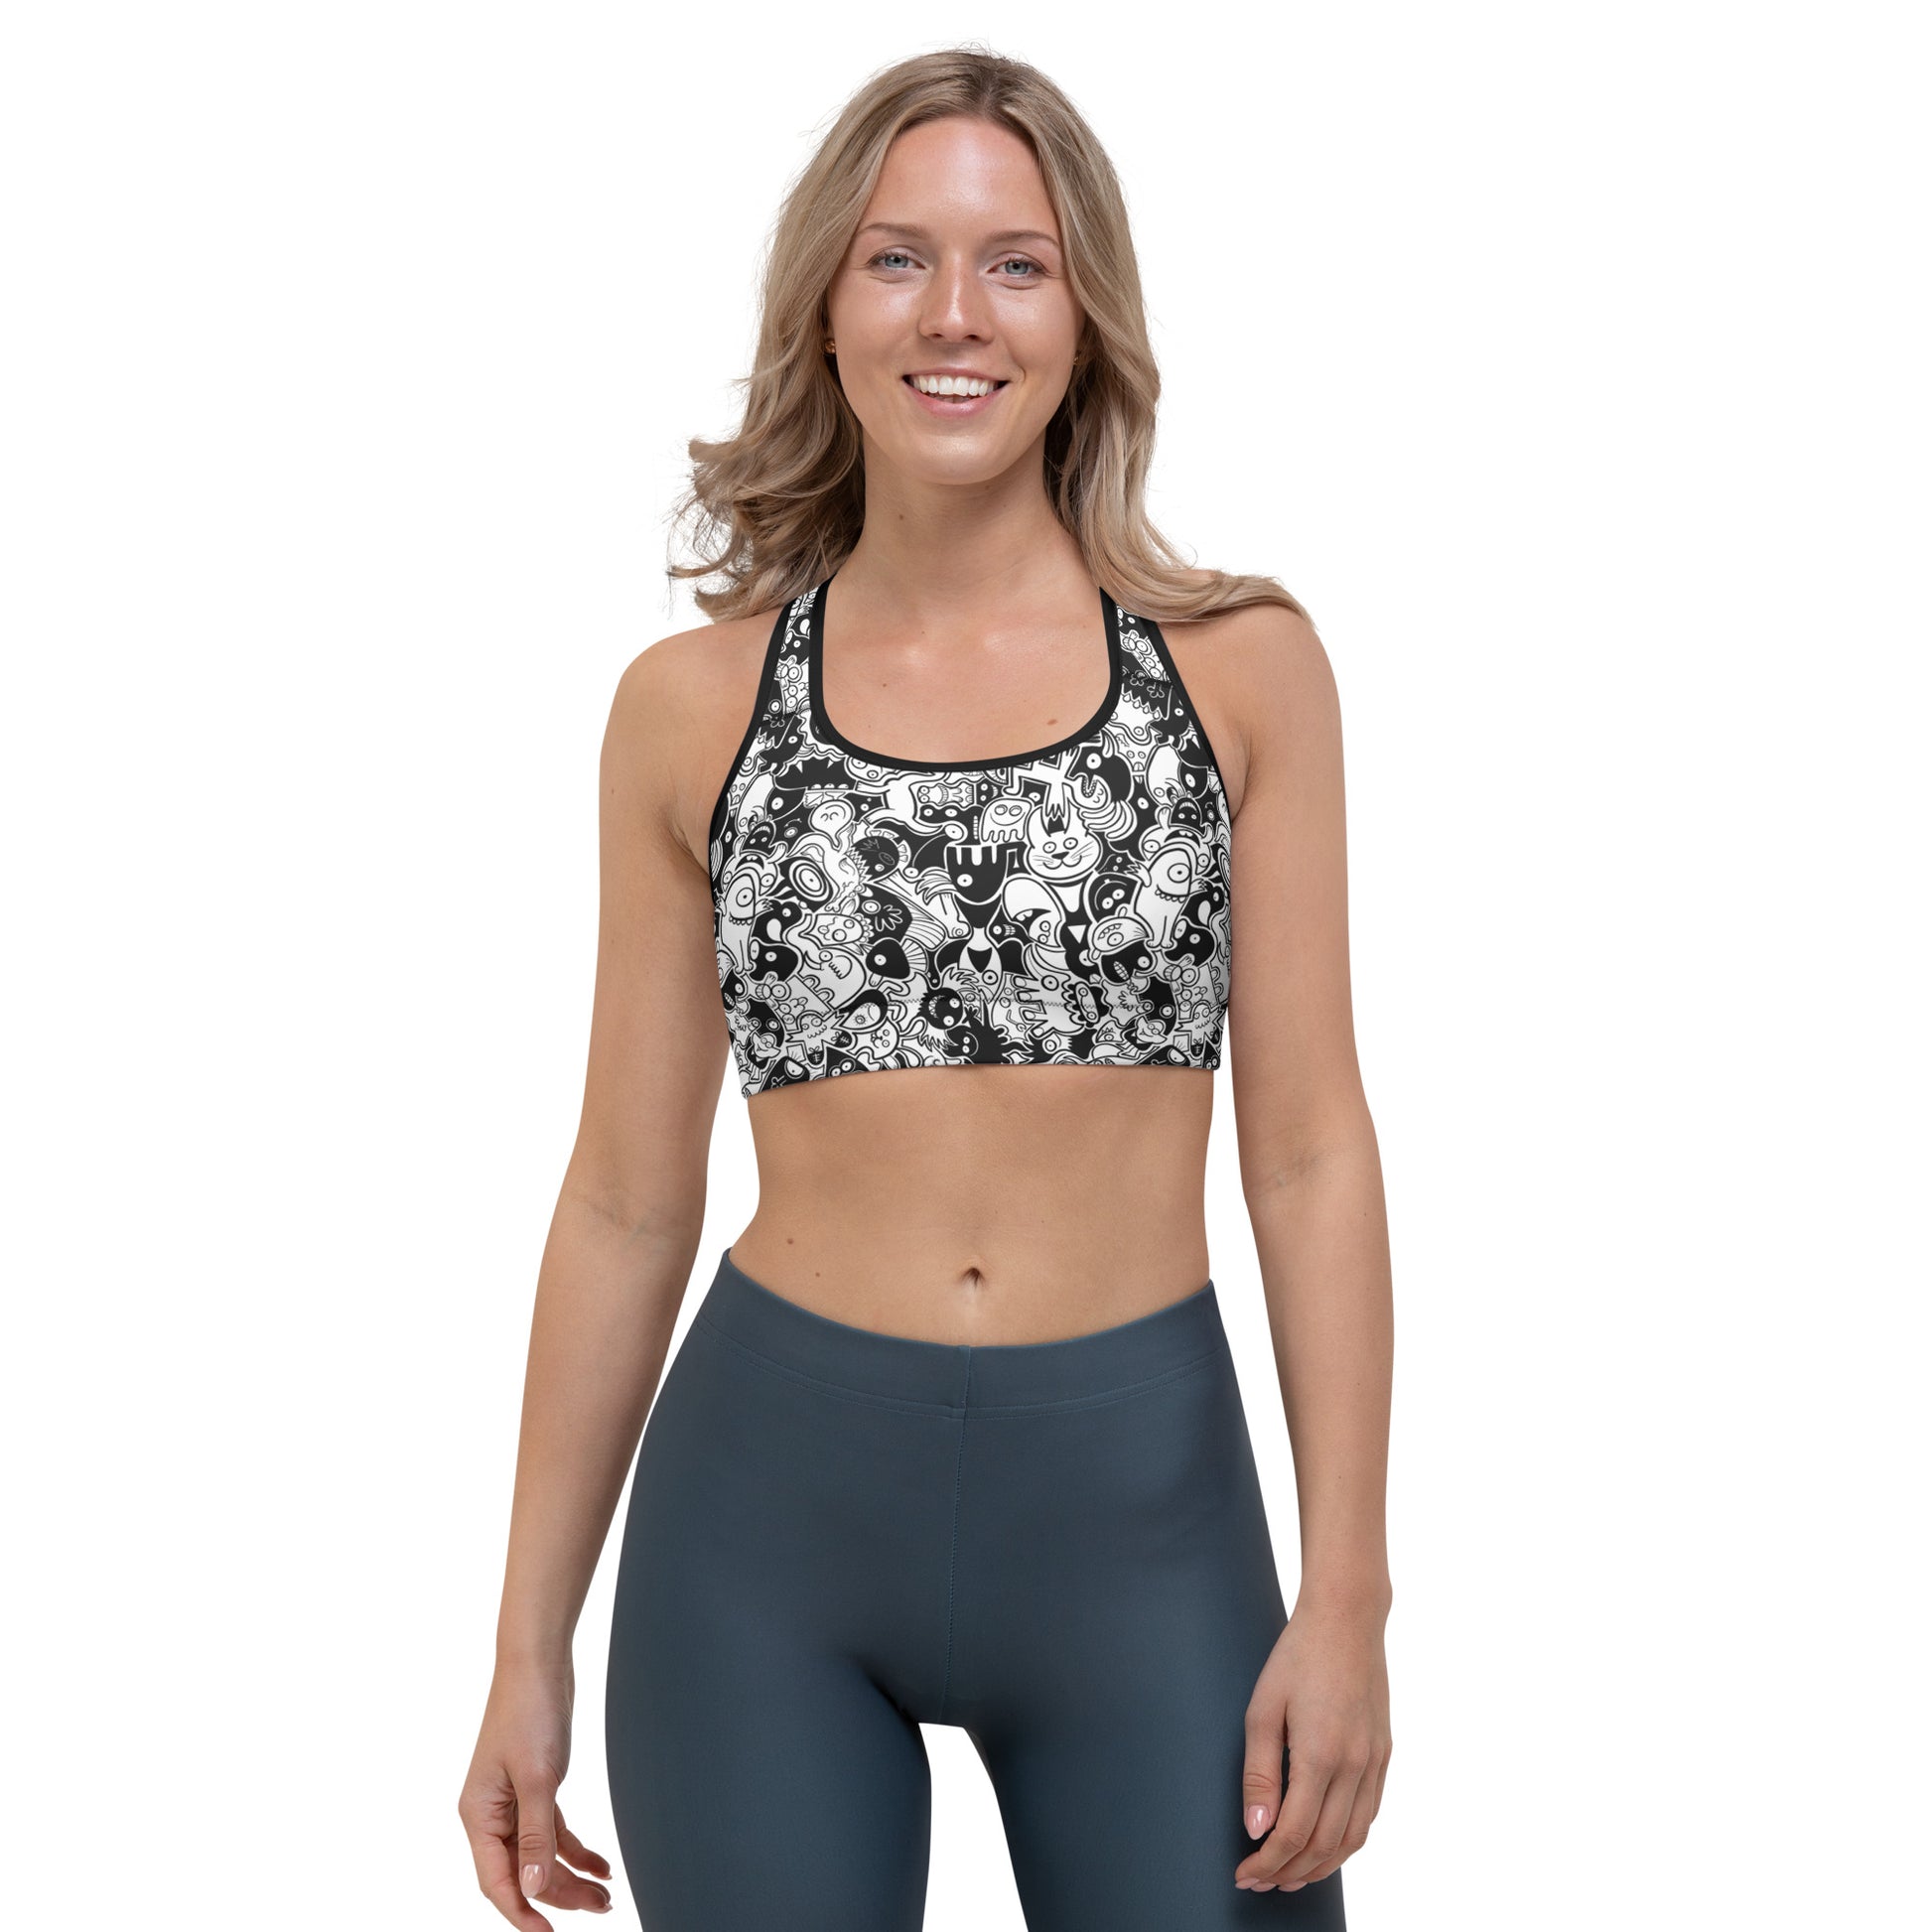 Joyful crowd of black and white doodle creatures Sports bra. Front view